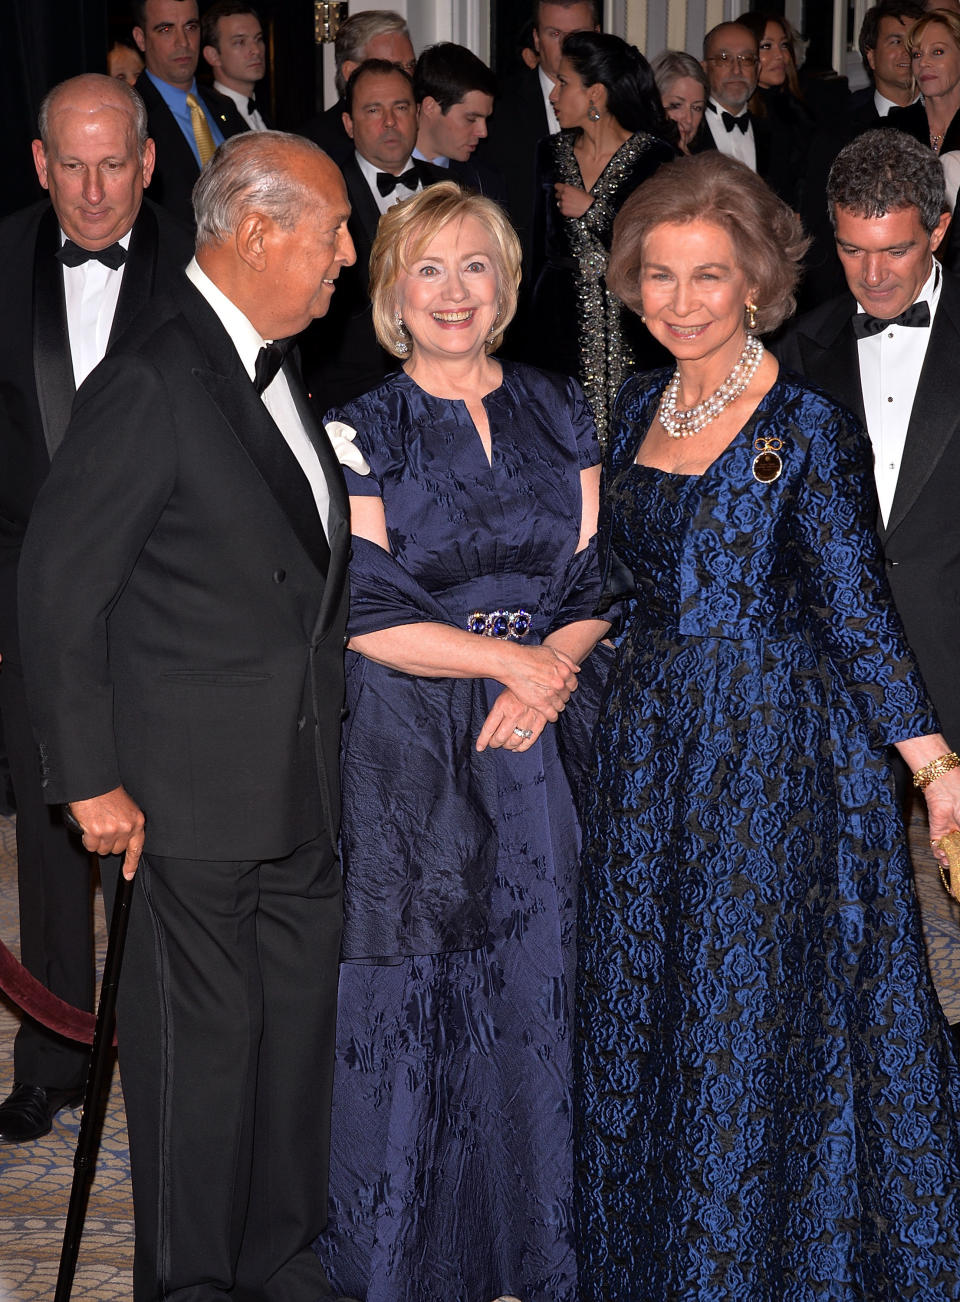 NEW YORK, NY - NOVEMBER 19:  (L-R) Oscar de la Renta, Hillary Rodham Clinton and Her Majesty Queen Sofia of Spain attend the Queen Sofia Spanish Institute 2013 Gold Medal Gala at The Waldorf=Astoria on November 19, 2013 in New York City.  (Photo by Andrew H. Walker/Getty Images)